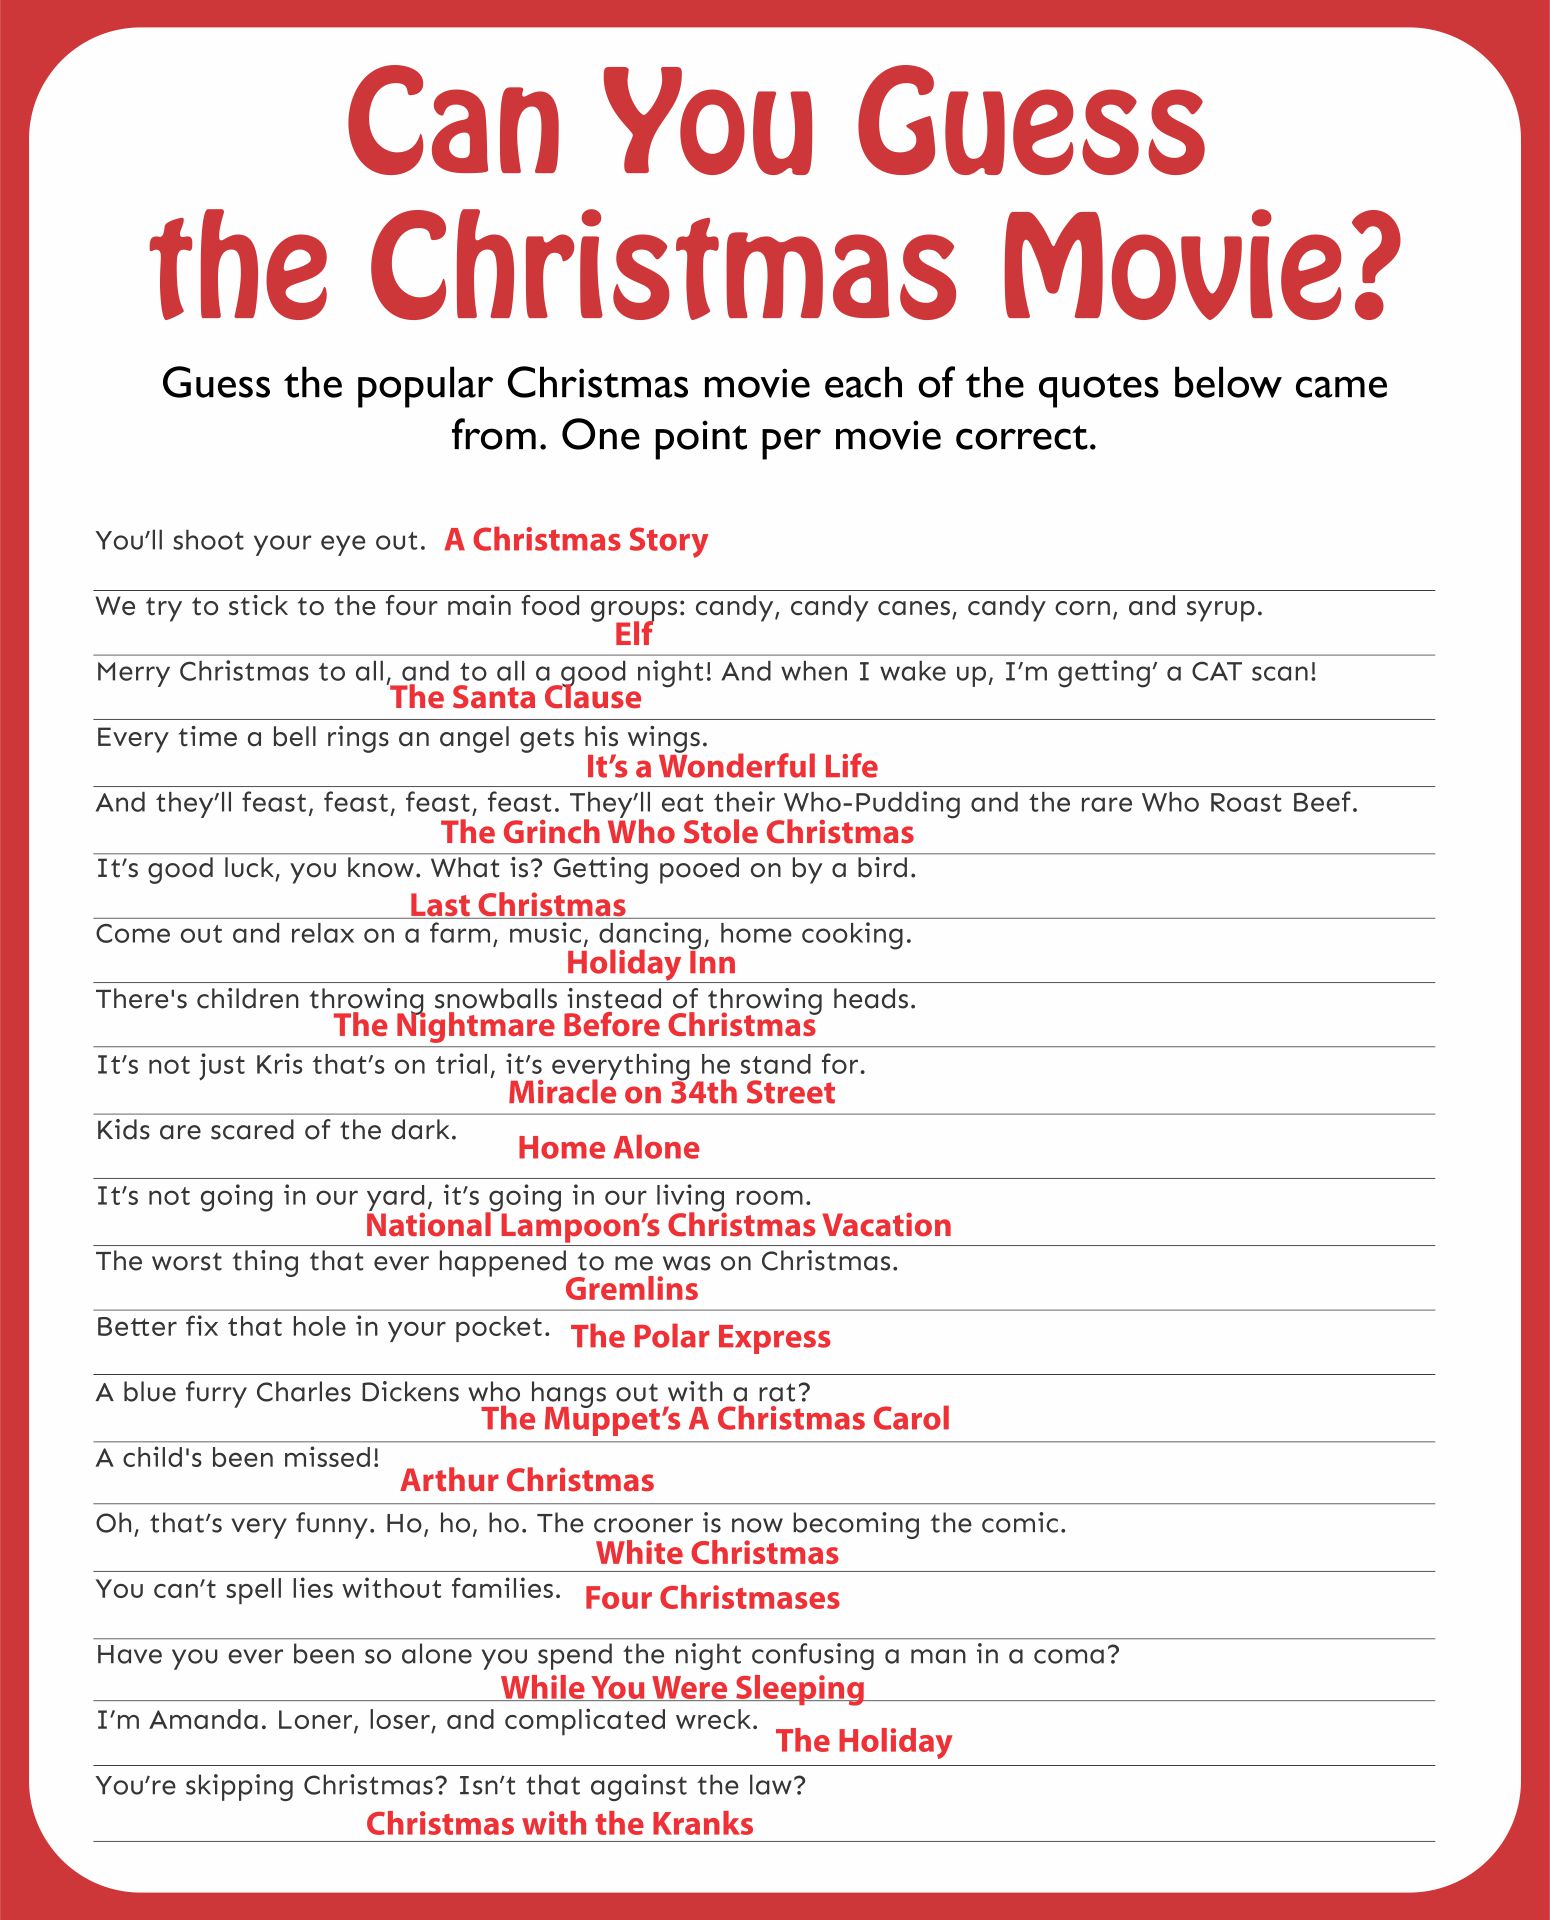 christmas-movie-trivia-2023-latest-perfect-the-best-list-of-christmas